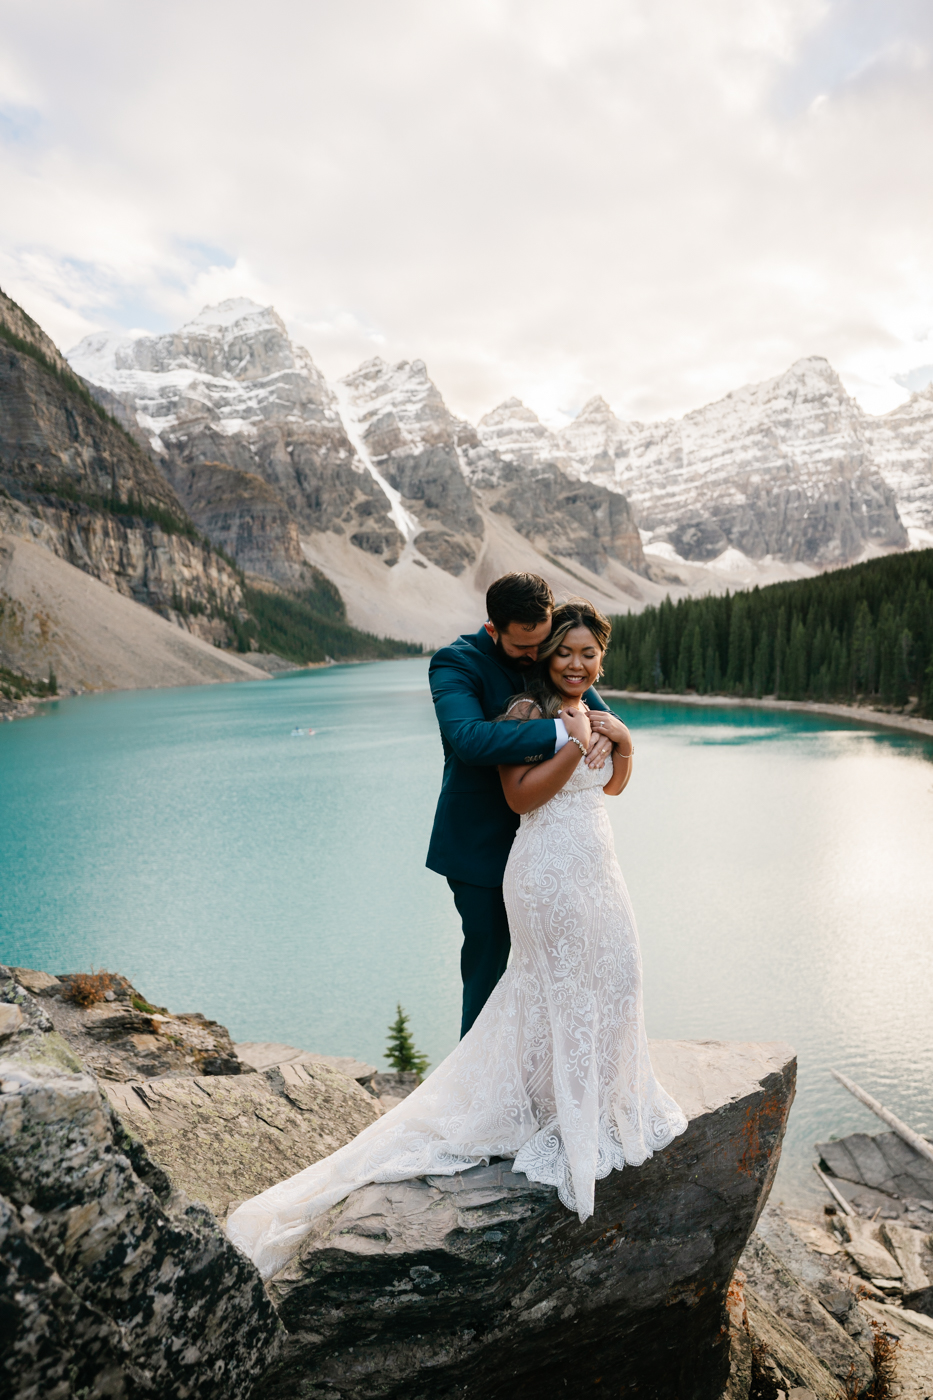 Bride and groom embrace during sunset at Moraine Lake